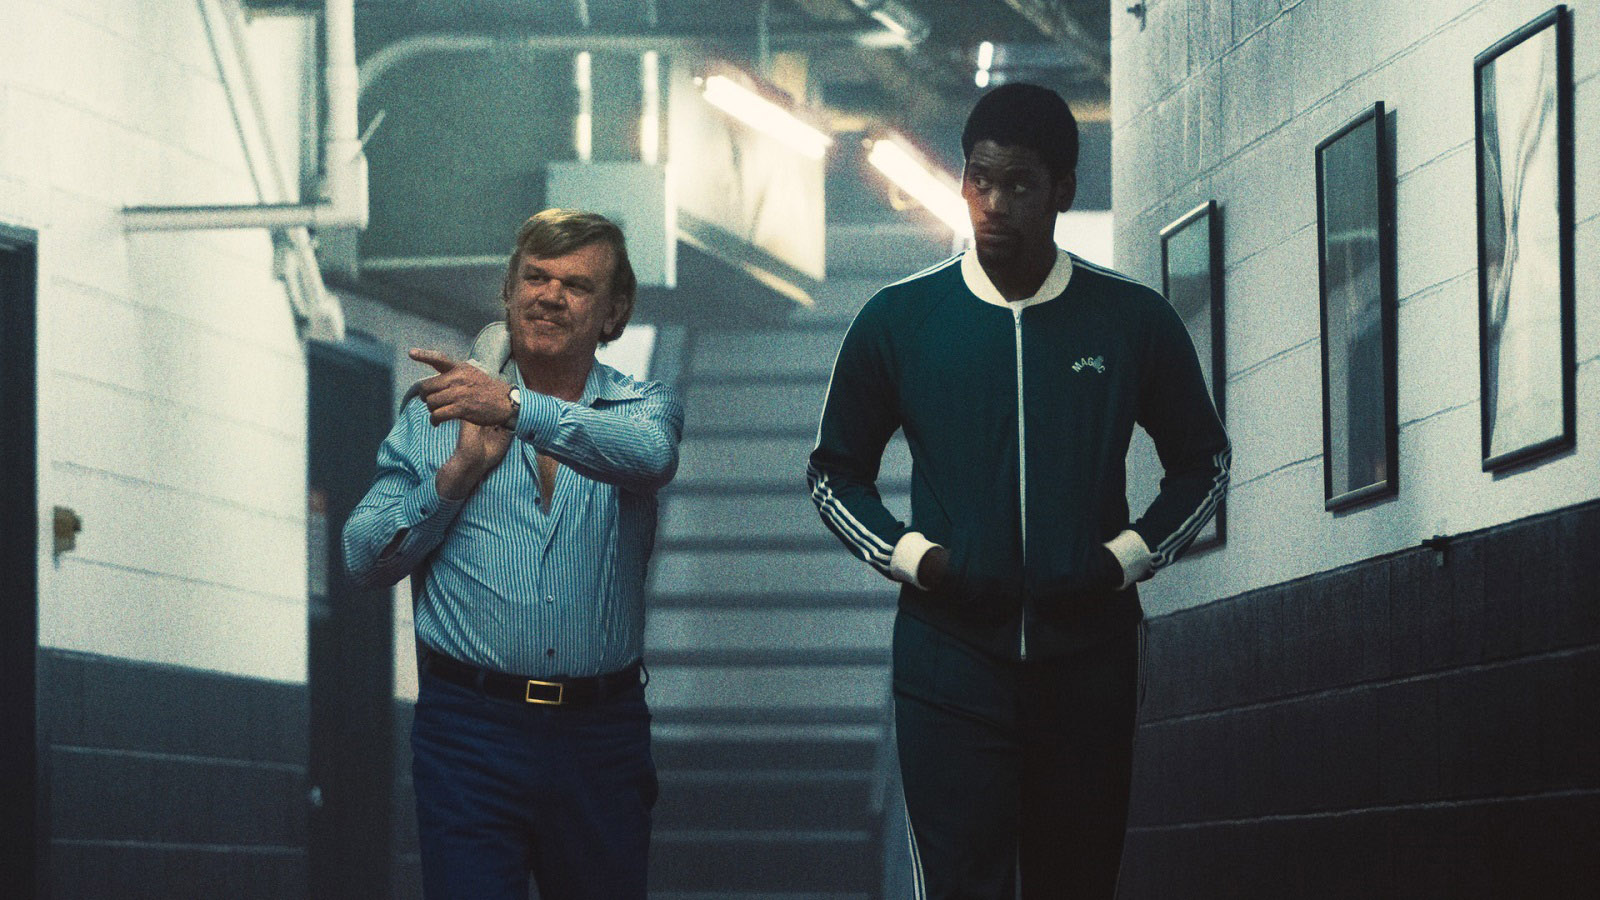 John C. Reilly as Jerry Buss & Quincy Isaiah as Magic Johnson in 'Winning Time'